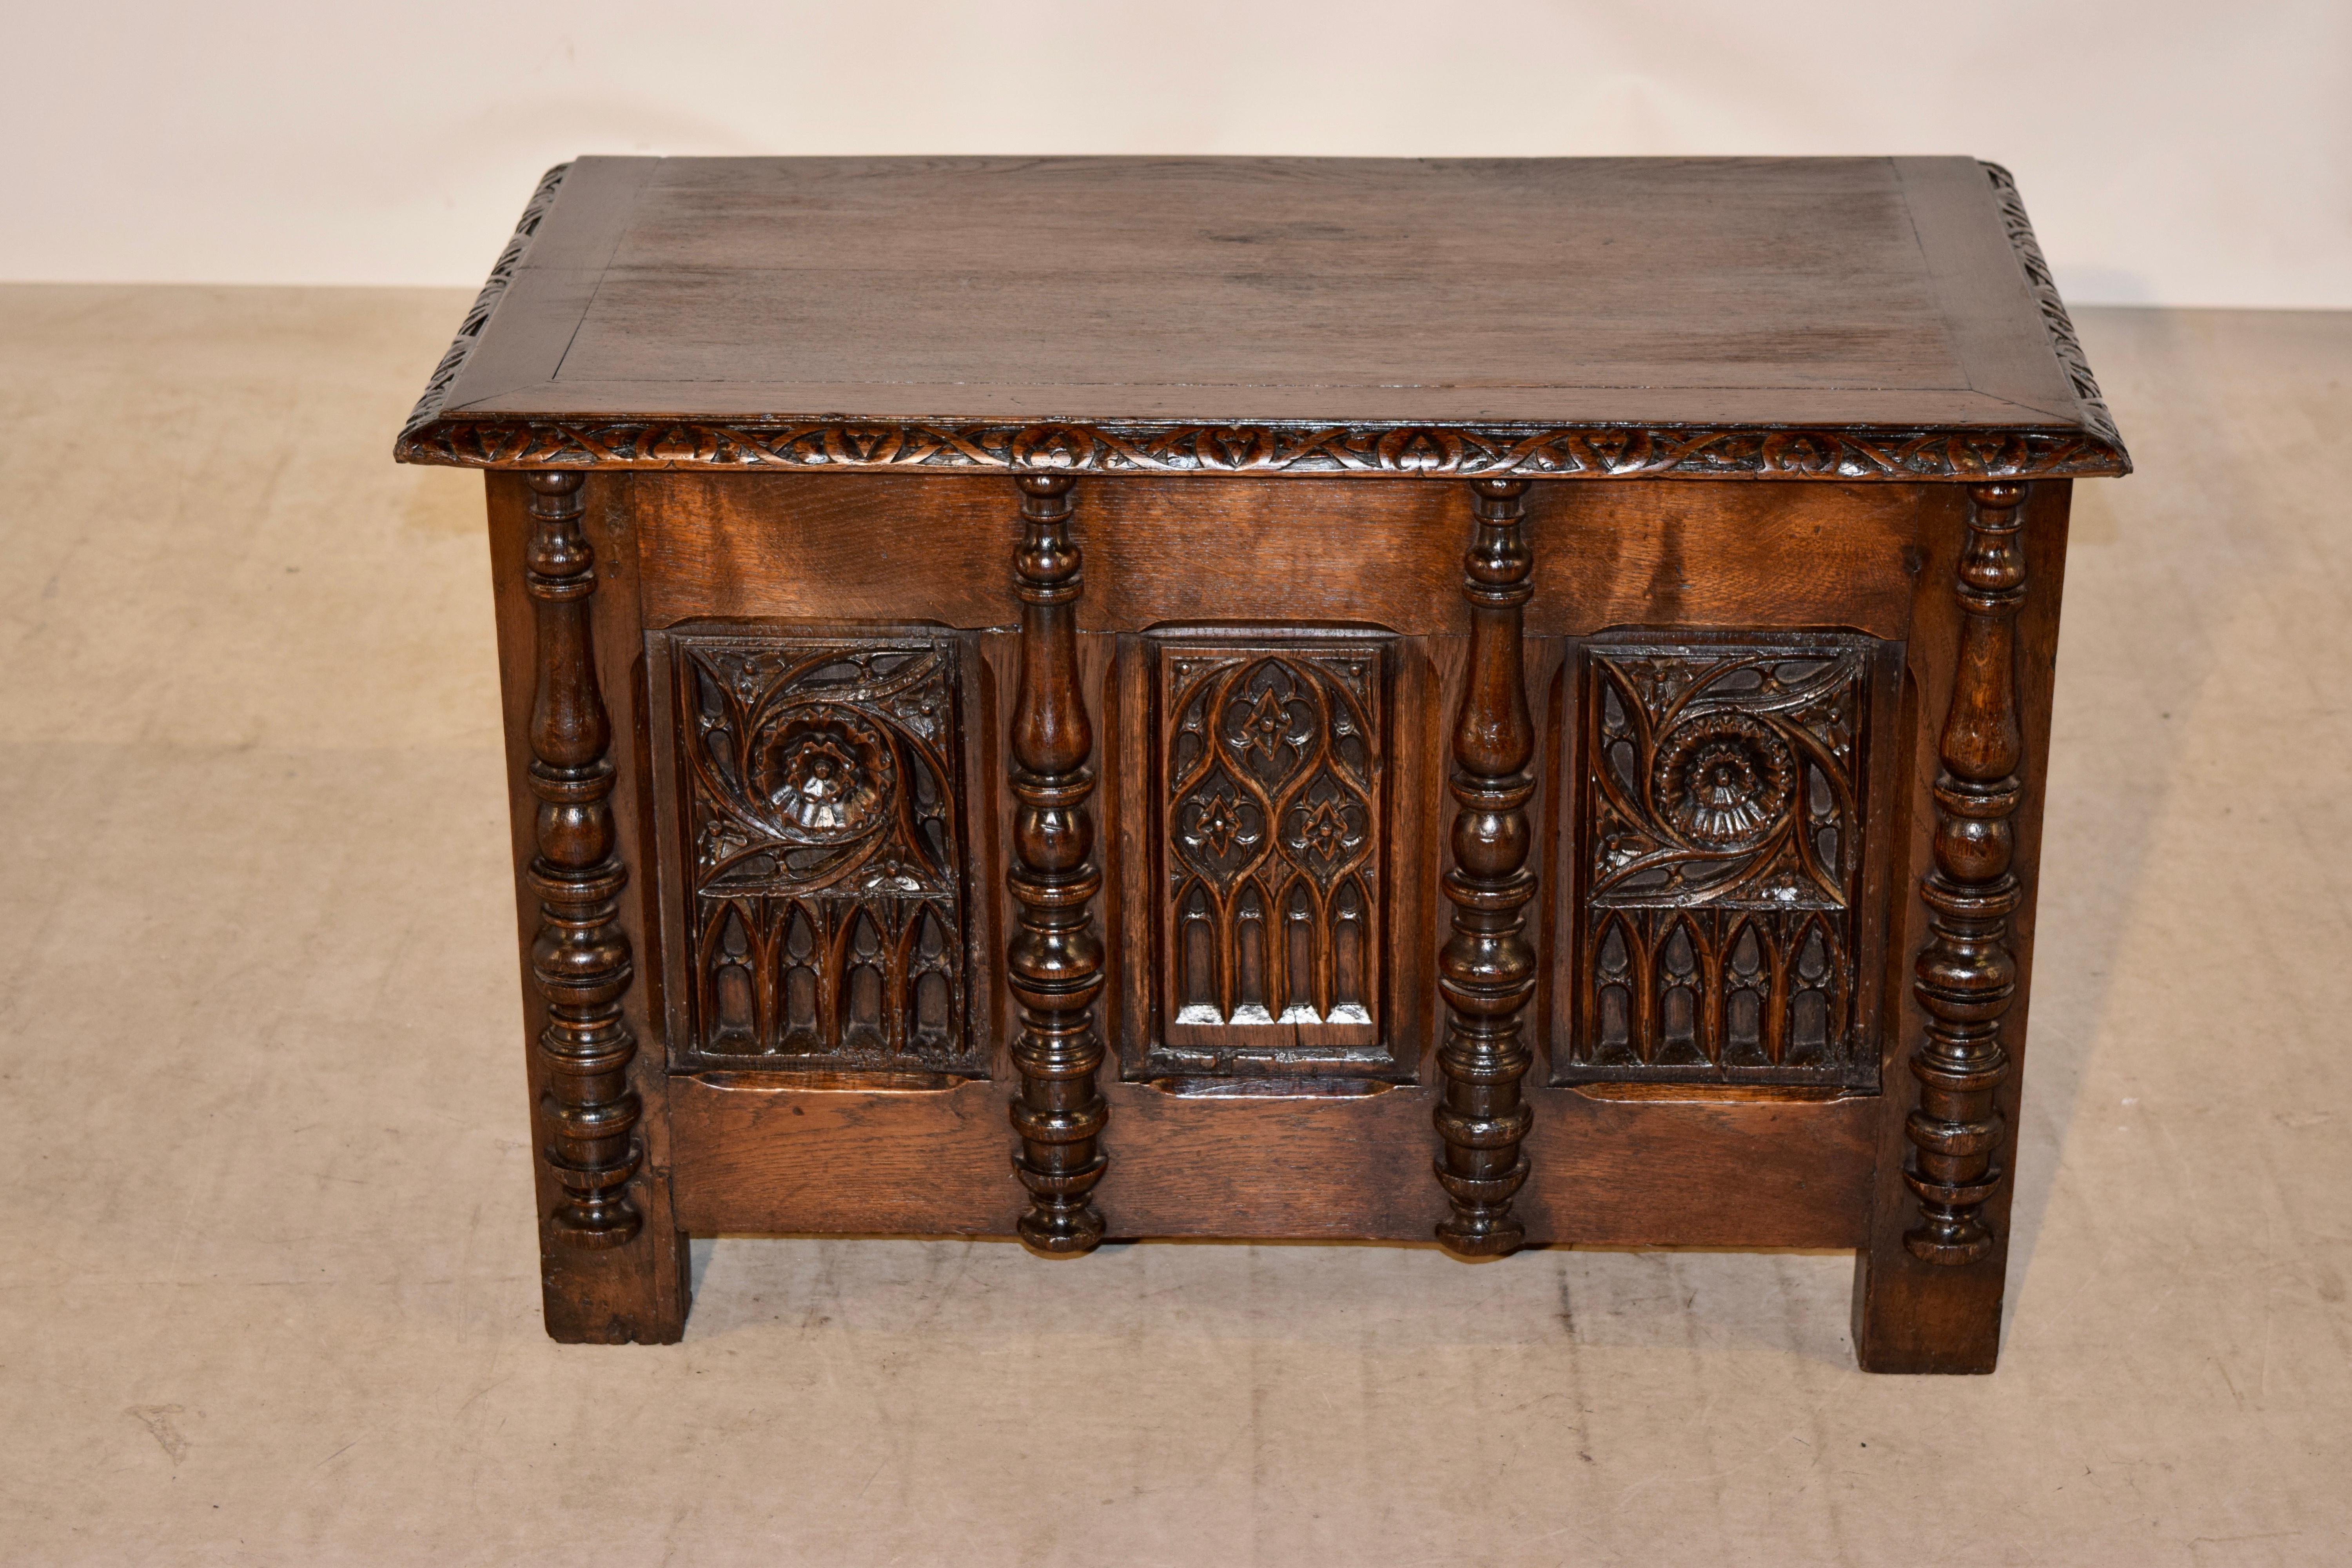 19th century small blanket chest from England with a banded top which has a beautifully hand carved decorated beveled edge following down to raised paneled sides and three raised and hand carved decorated panels in the front, flanked by applied half